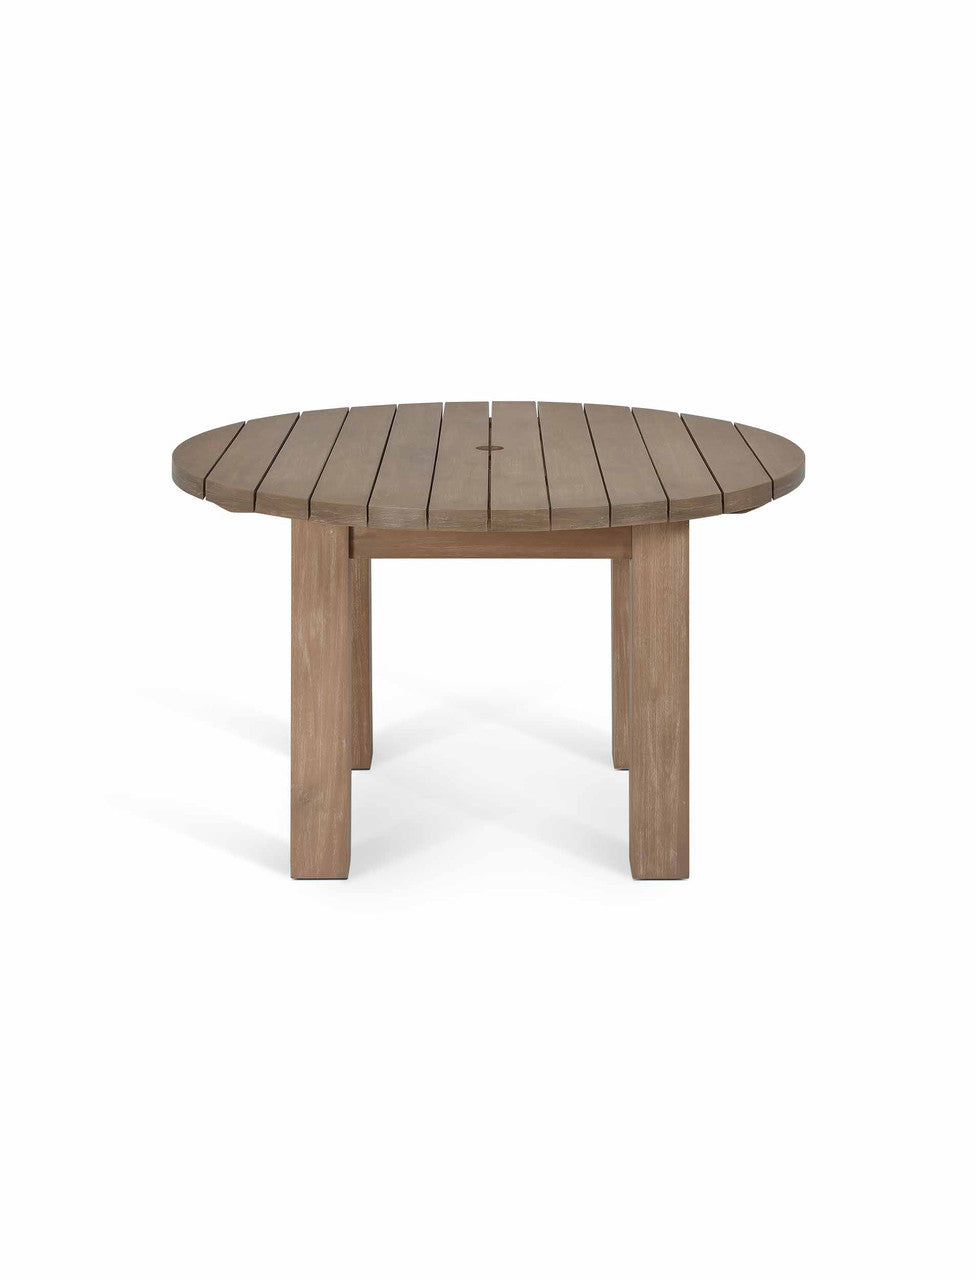 Porthallow Round Dining Table